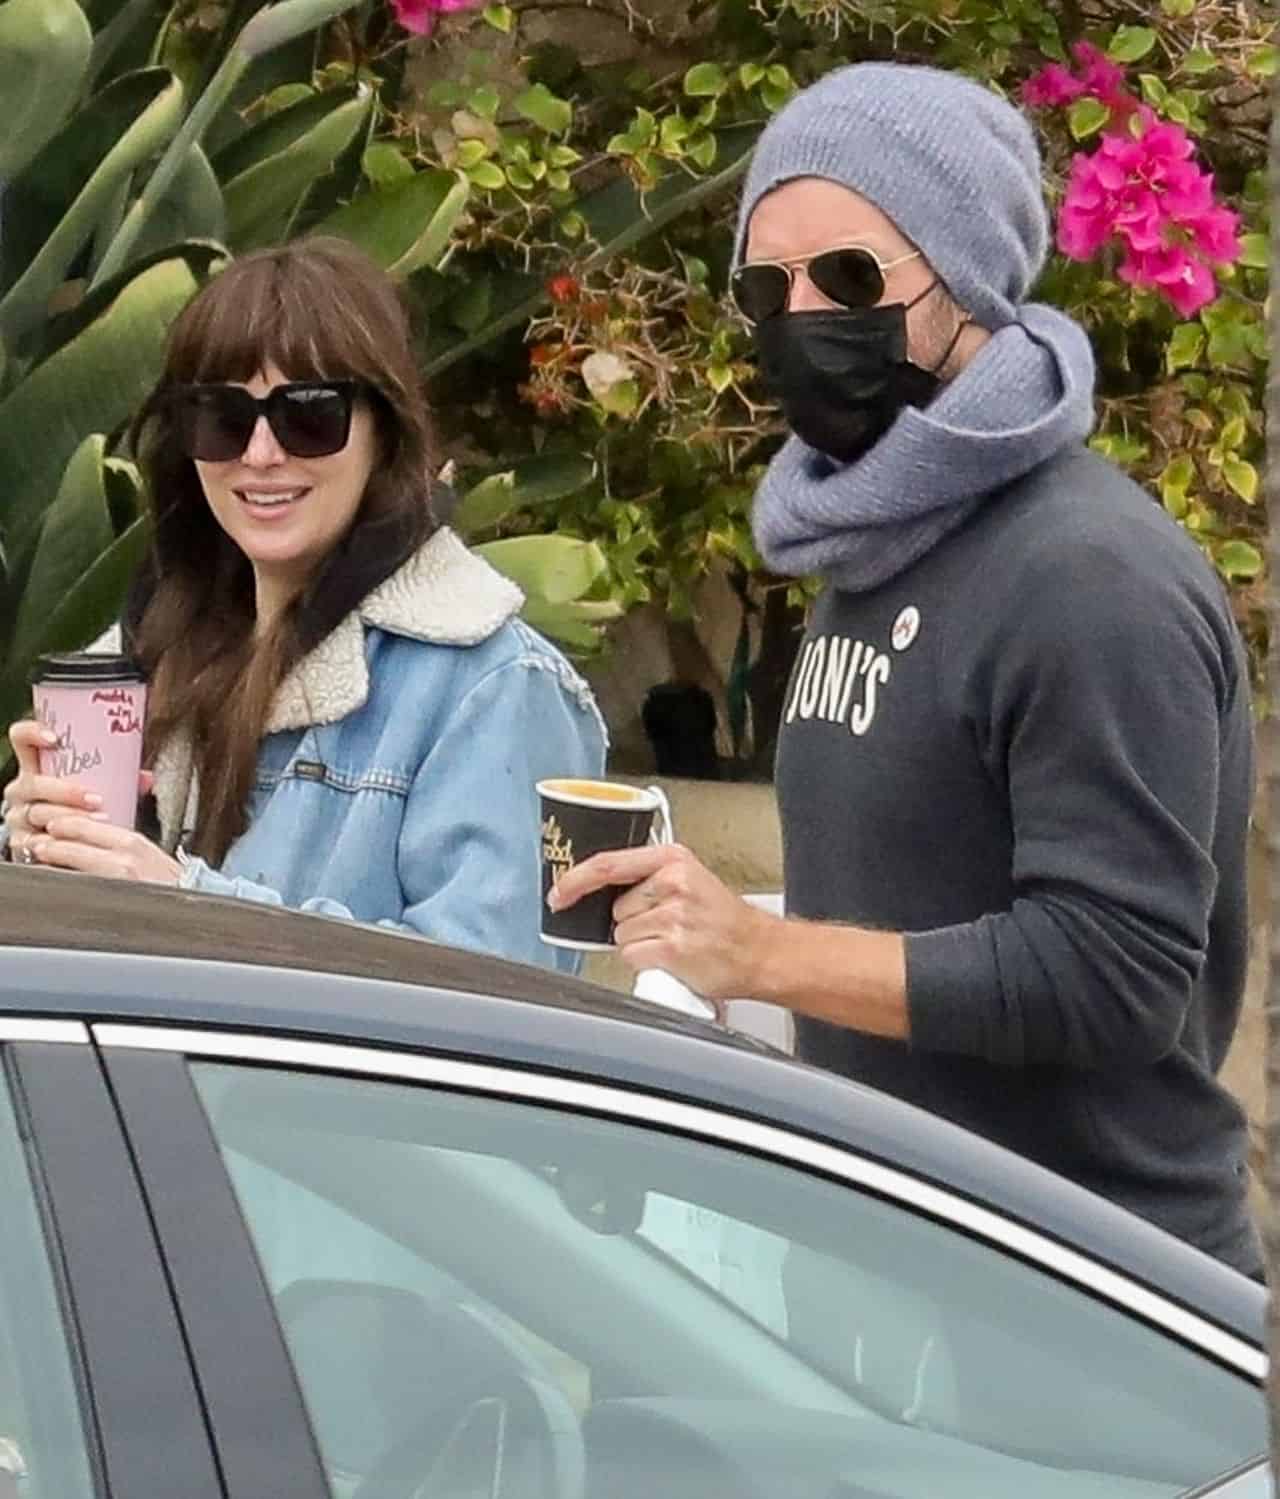 Dakota Johnson and Chris Martin Have a Blast During a Coffee Date Together